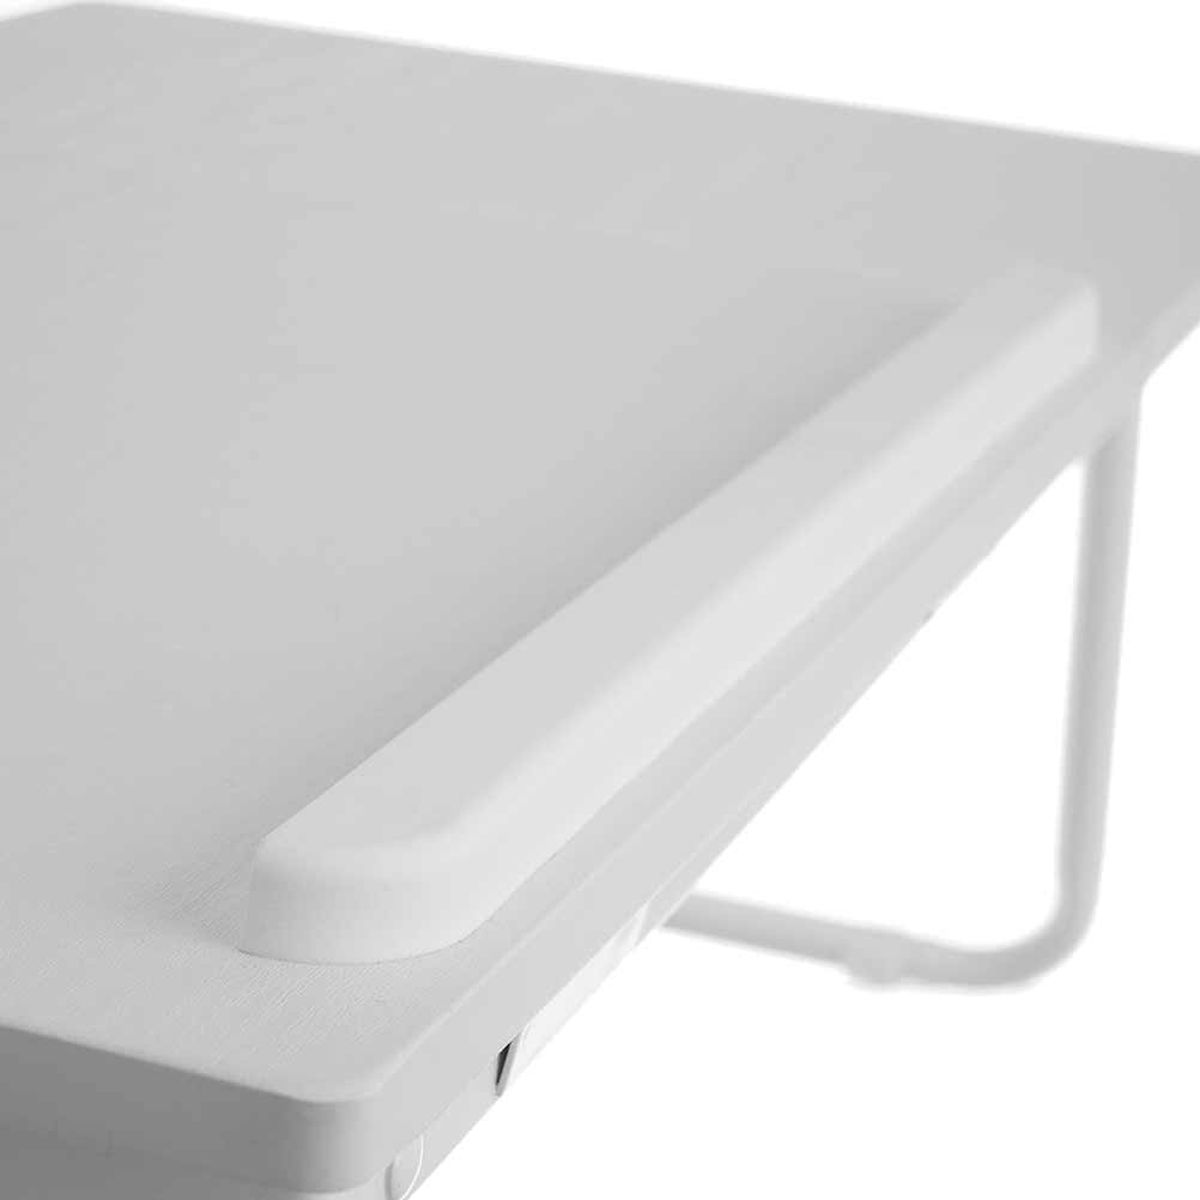 Folding and lifting worktop in white metal